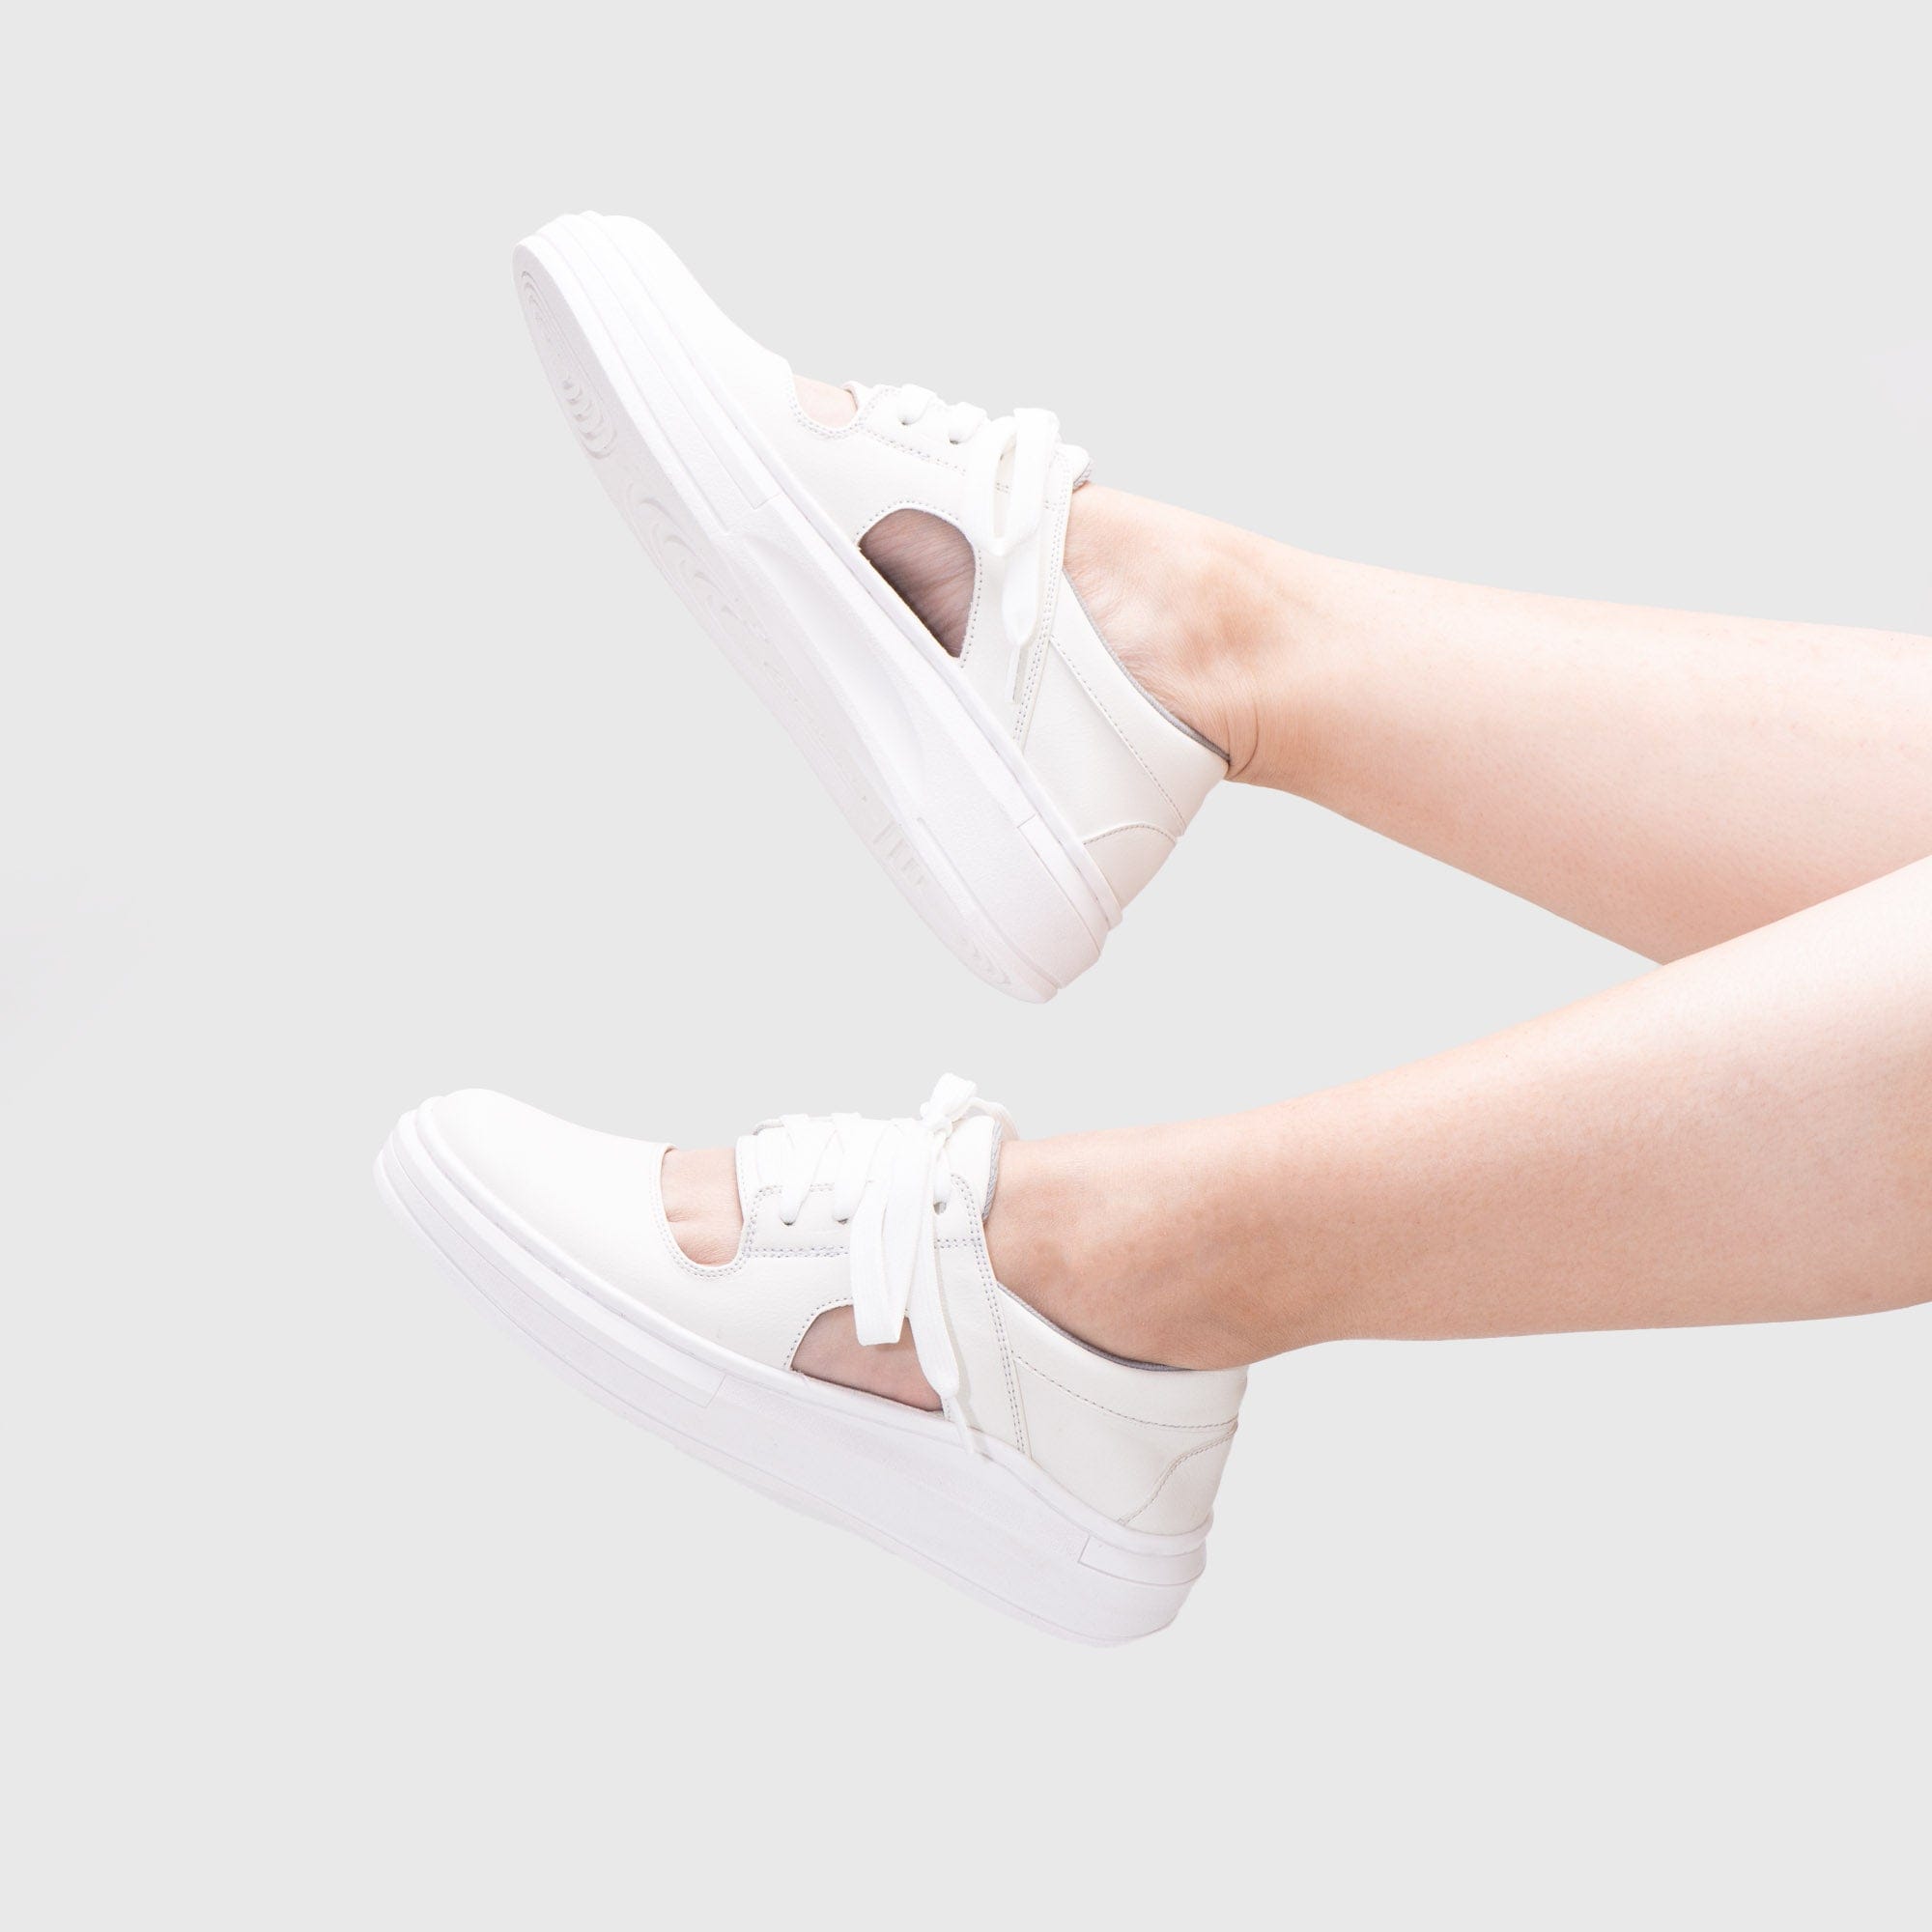 Adorable Projects Official Adorableprojects - Nicholet Sneakers White - Sneakers Putih